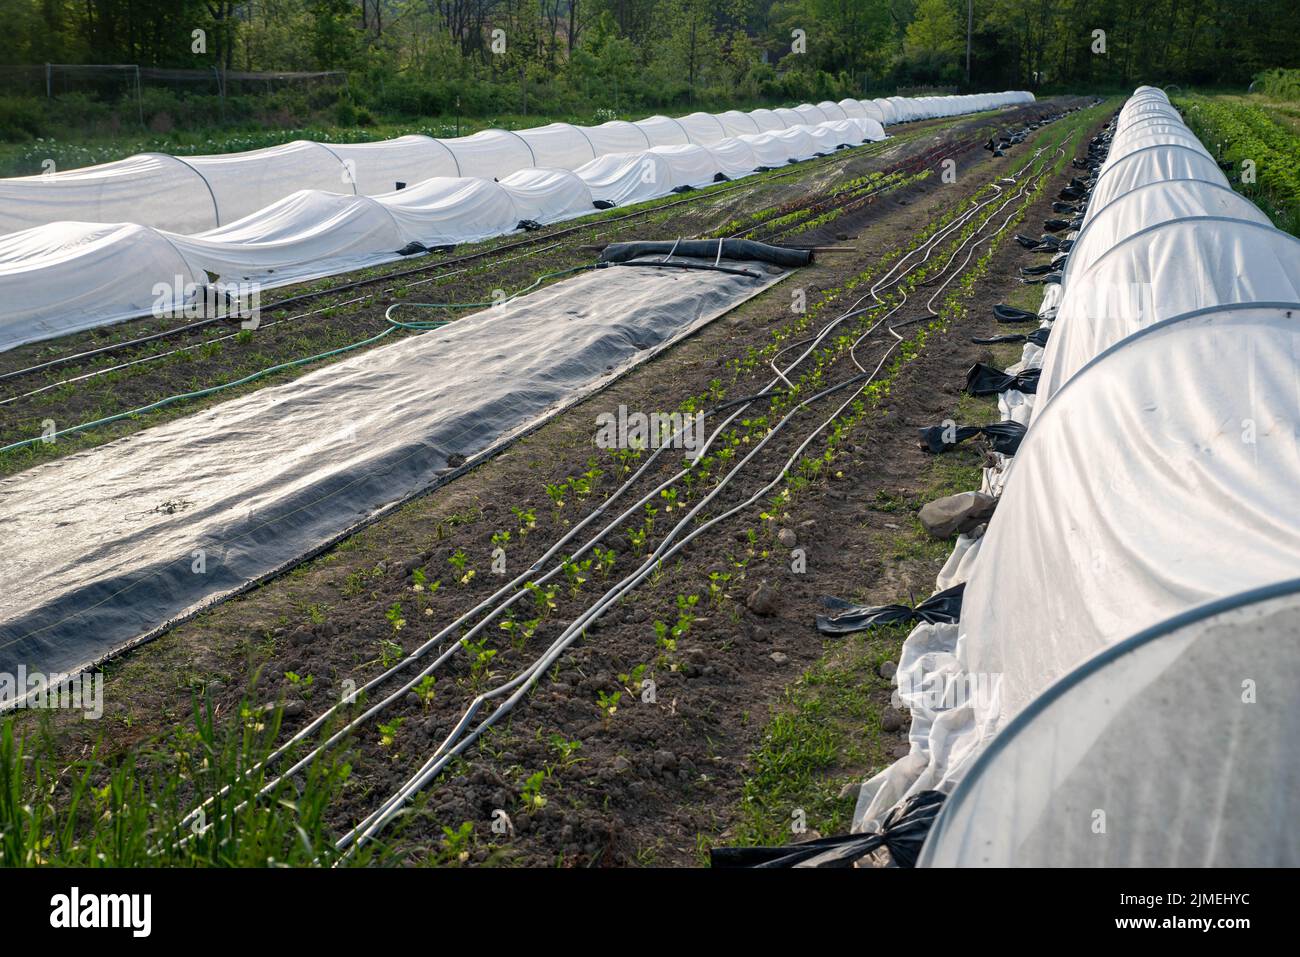 Rows of garden vegetables with row covers and irrigation lines Stock Photo